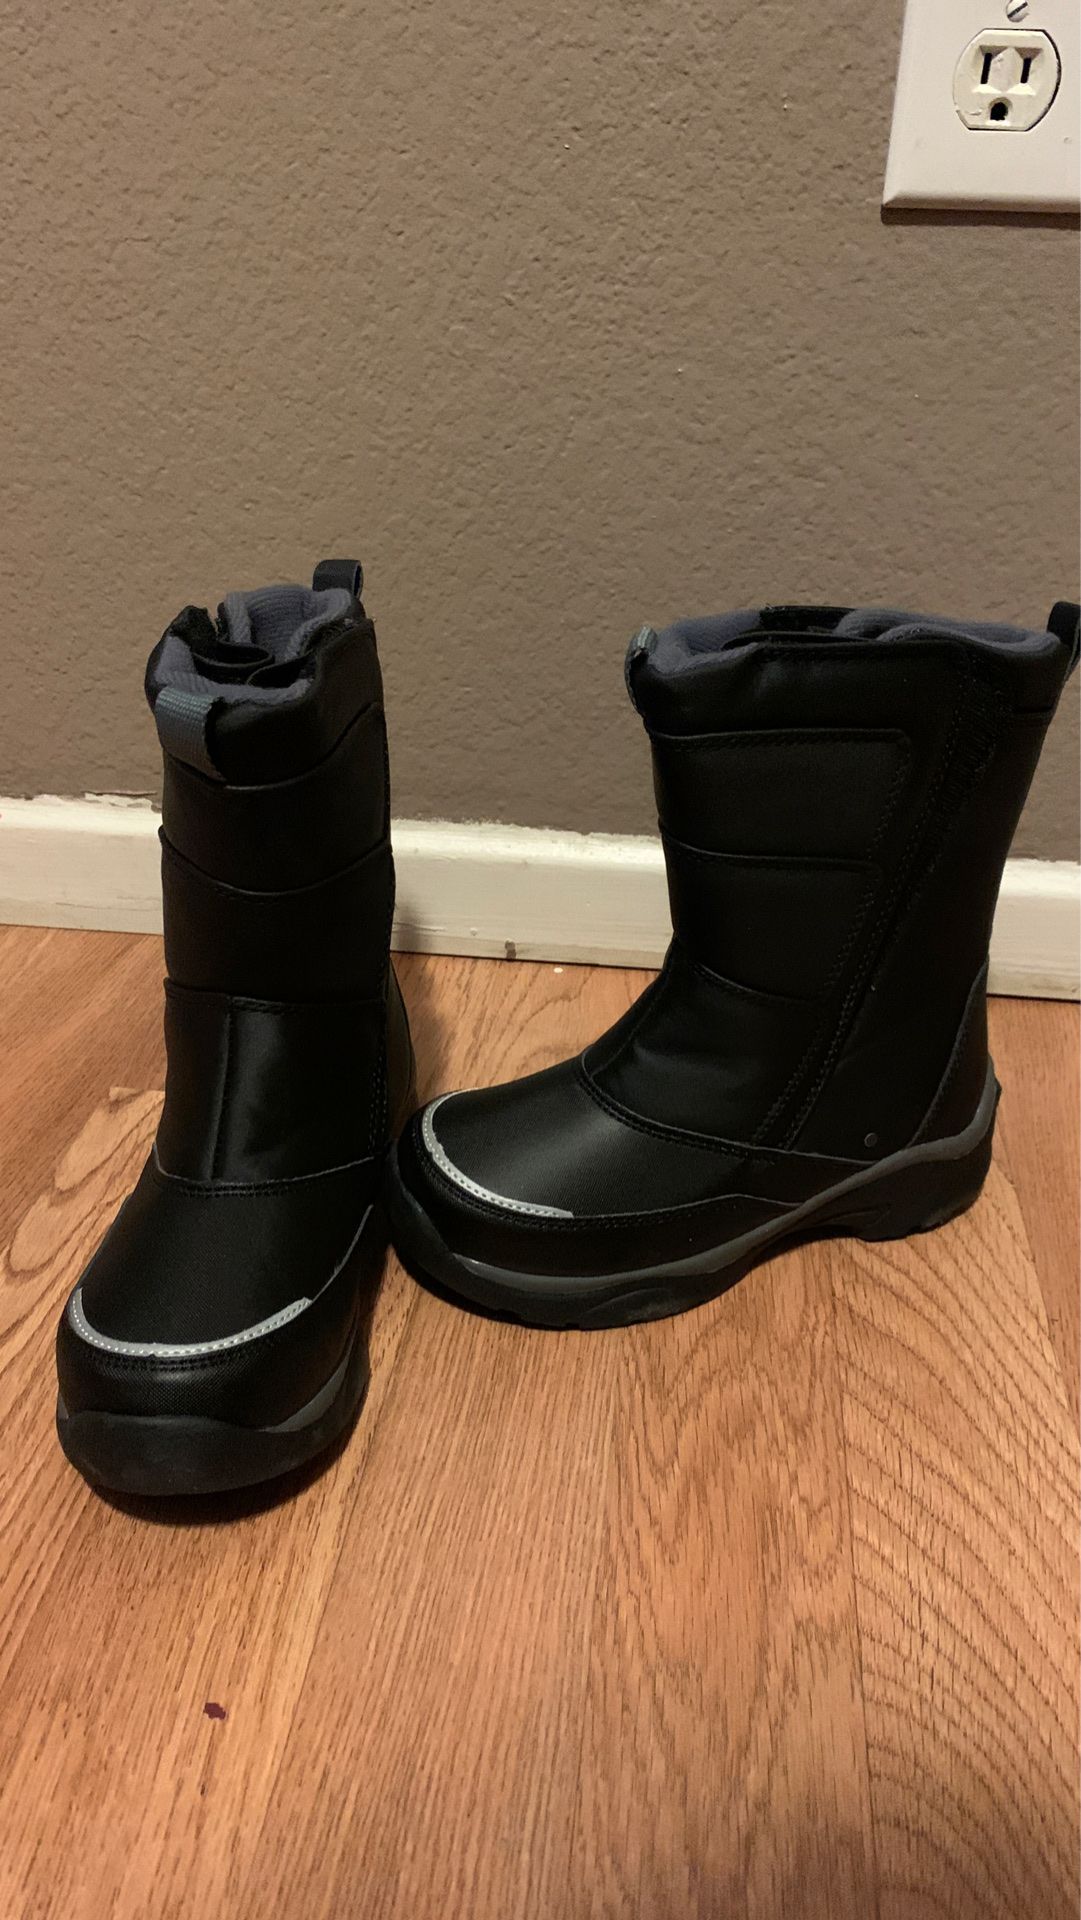 Snow boots kid size 13